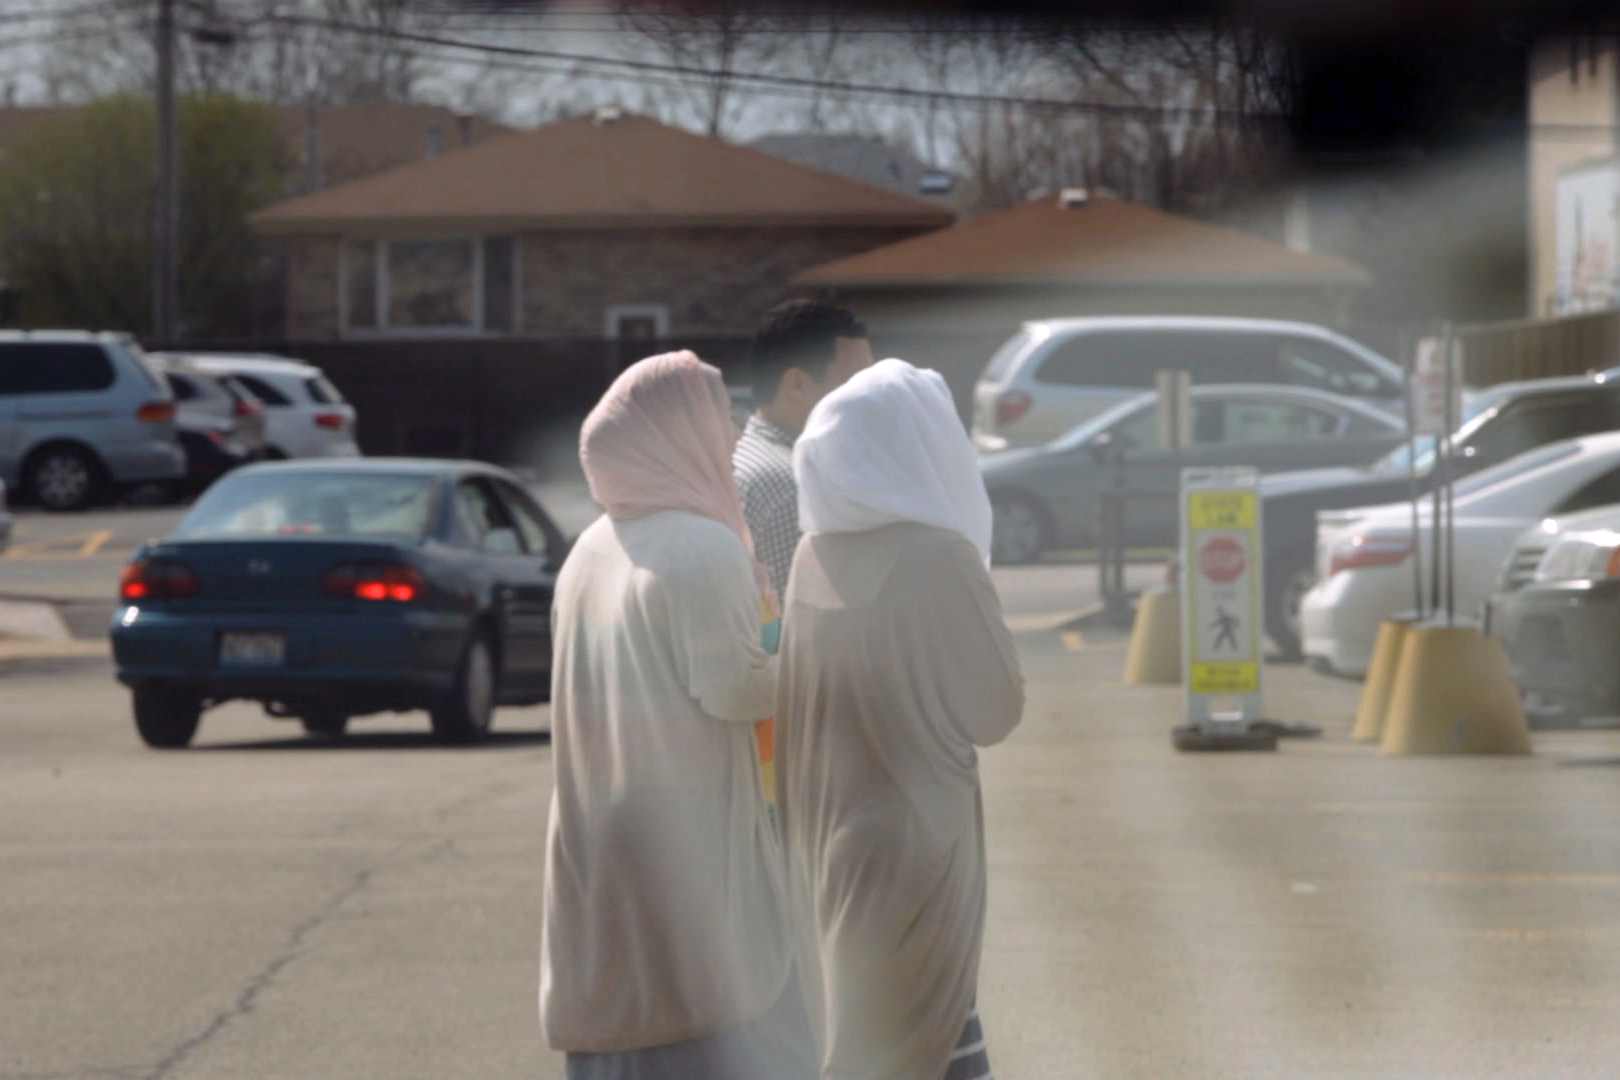 stillshot from the documentary featuring three people, two in hijab, and one man with short hair walking. the image is murky and taken from a distance, suggesting that it was taken from within a car